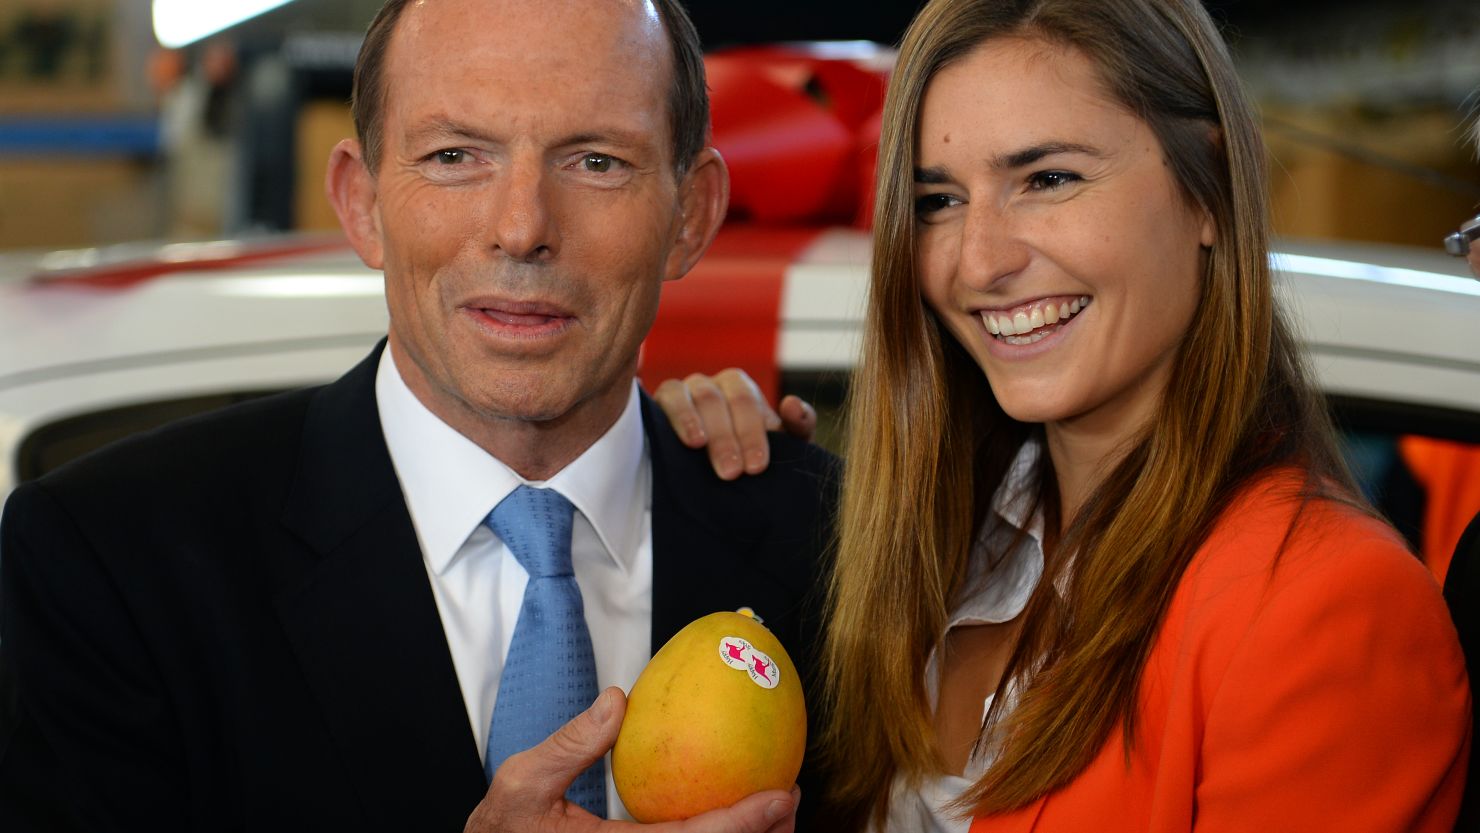 Australian opposition leader Tony Abbott poses with a mango and one of his "not bad looking daughters." What will he say next?